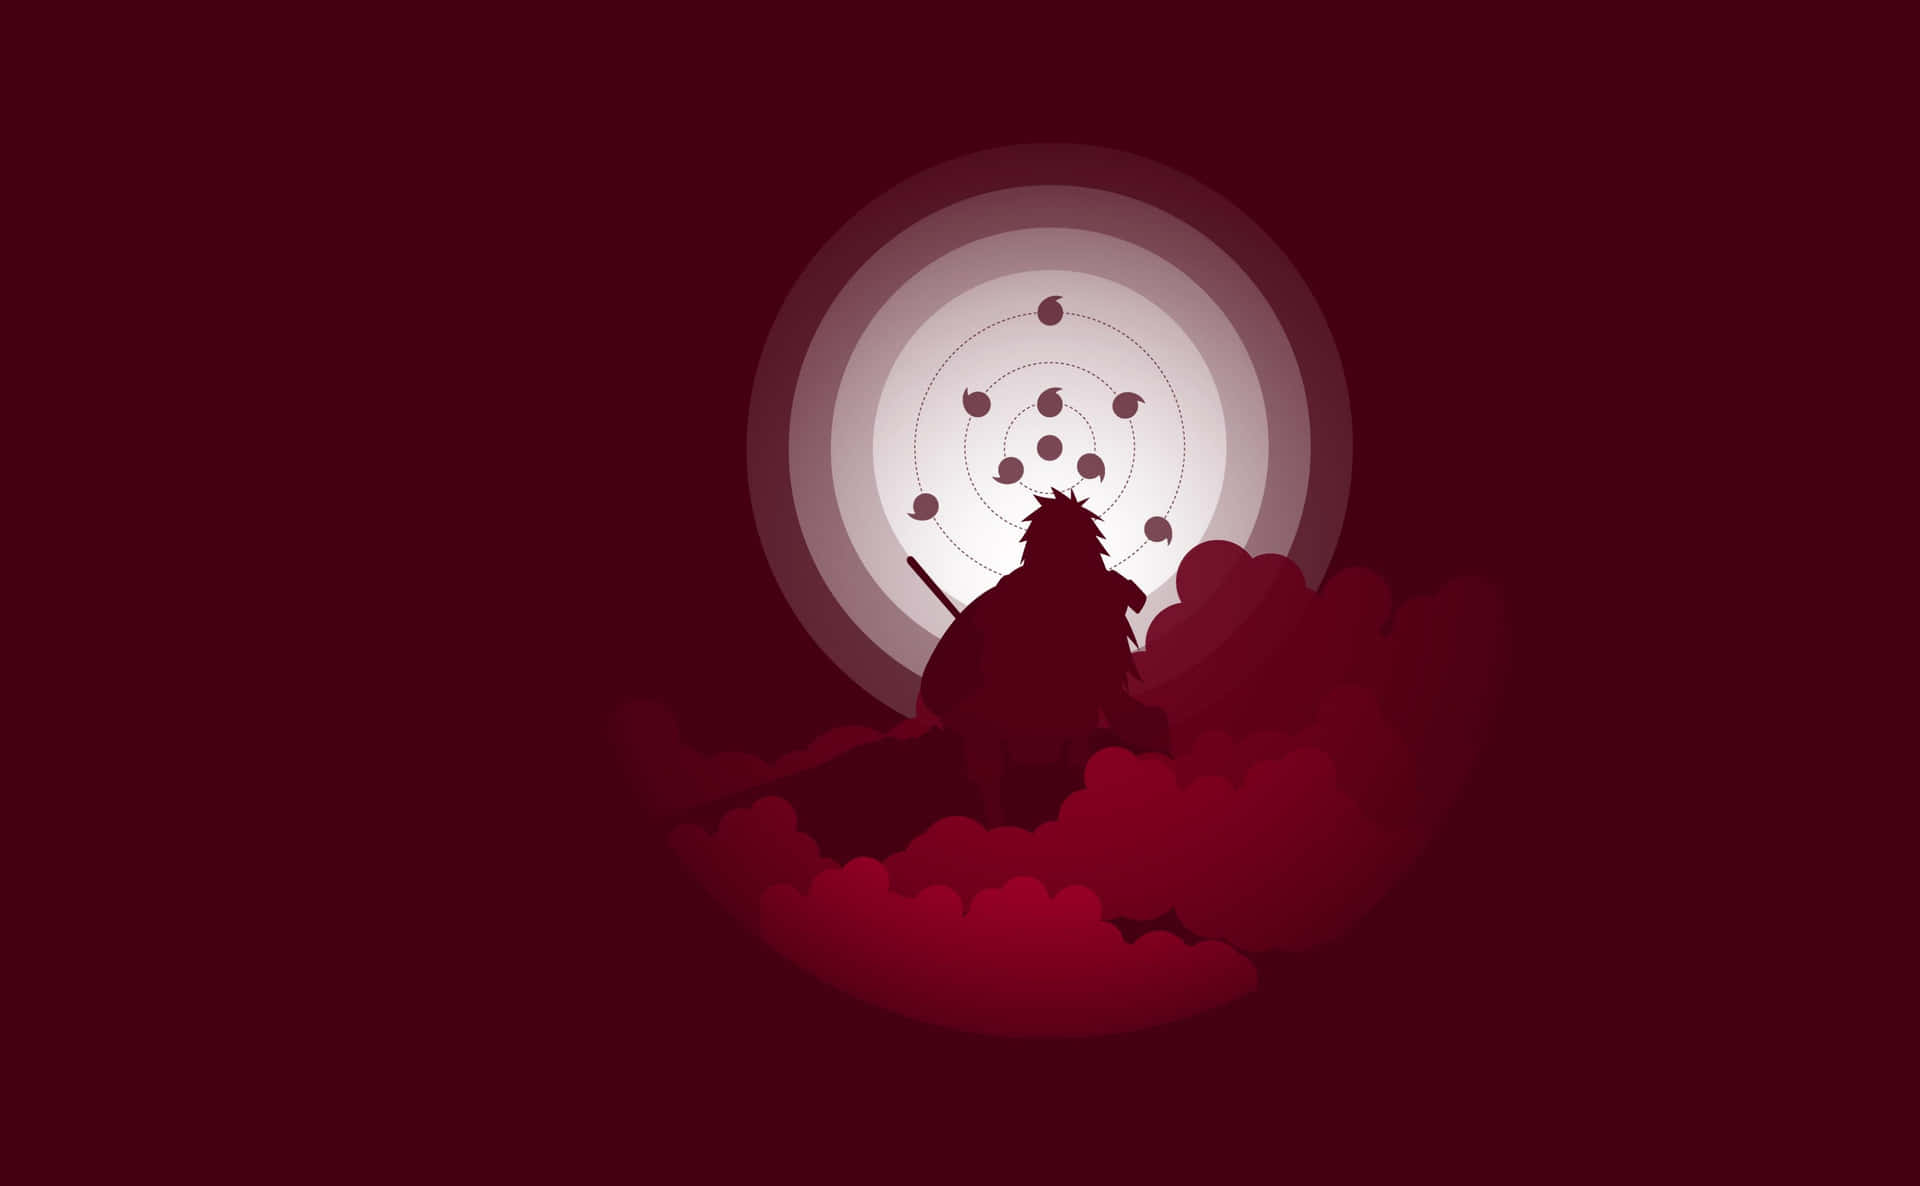 Feel the power of anime with this mesmerizing Anime Minimalist wallpaper. Wallpaper